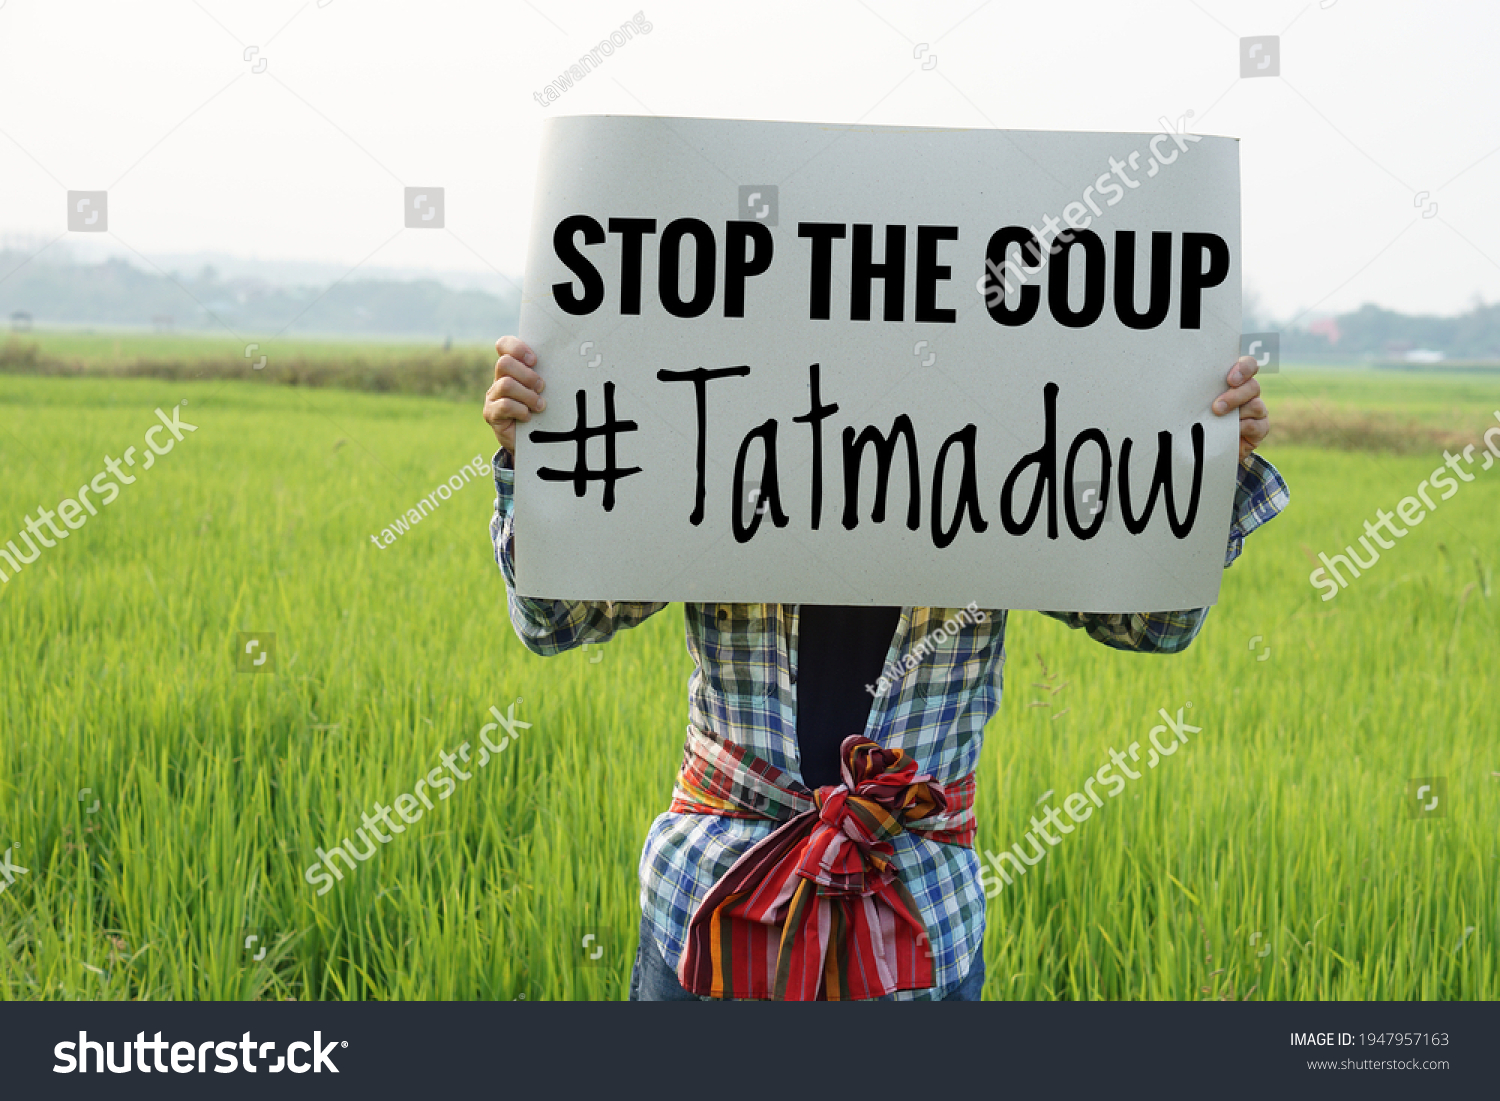 Myanmar man hold paper sign text " Stop the coup #Tatmadow". Concept protest the violence from the coup  in Myanmar. #1947957163